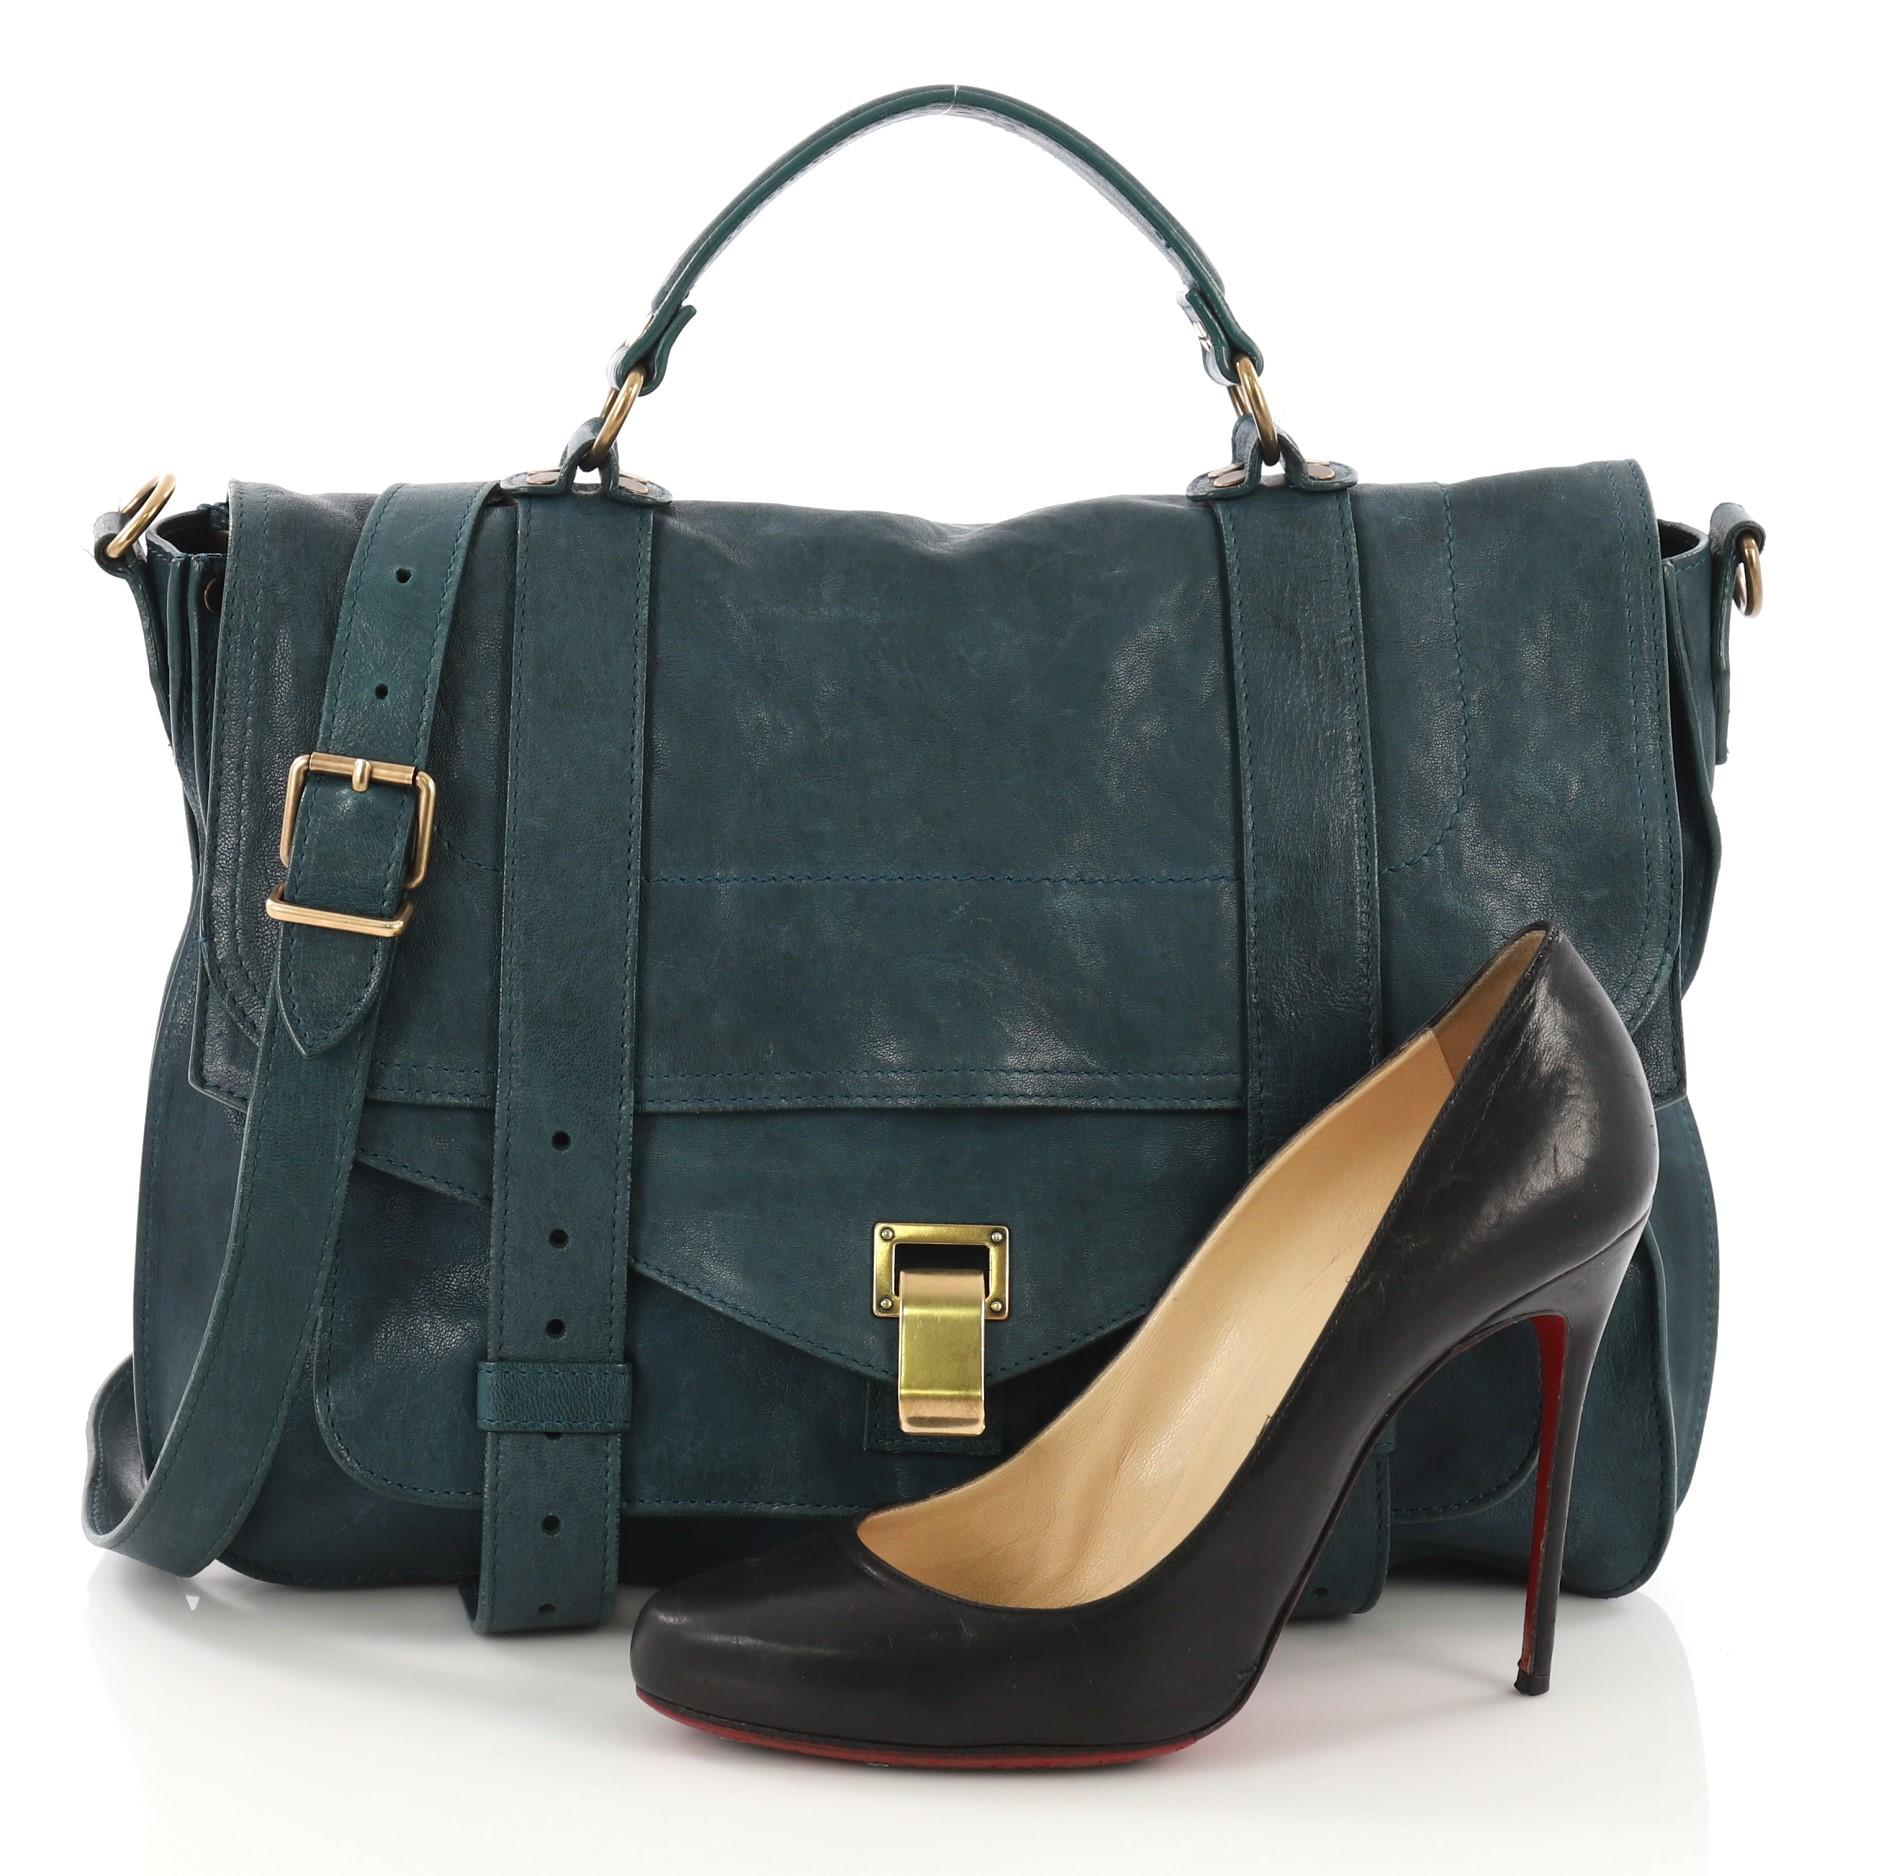 This Proenza Schouler PS1 Satchel Leather Large, crafted in teal leather, features a leather top handle, exterior back zip pocket, and aged gold-tone hardware. Its flip-clasp closure opens to a black fabric interior with a zip pocket. **Note: Shoe